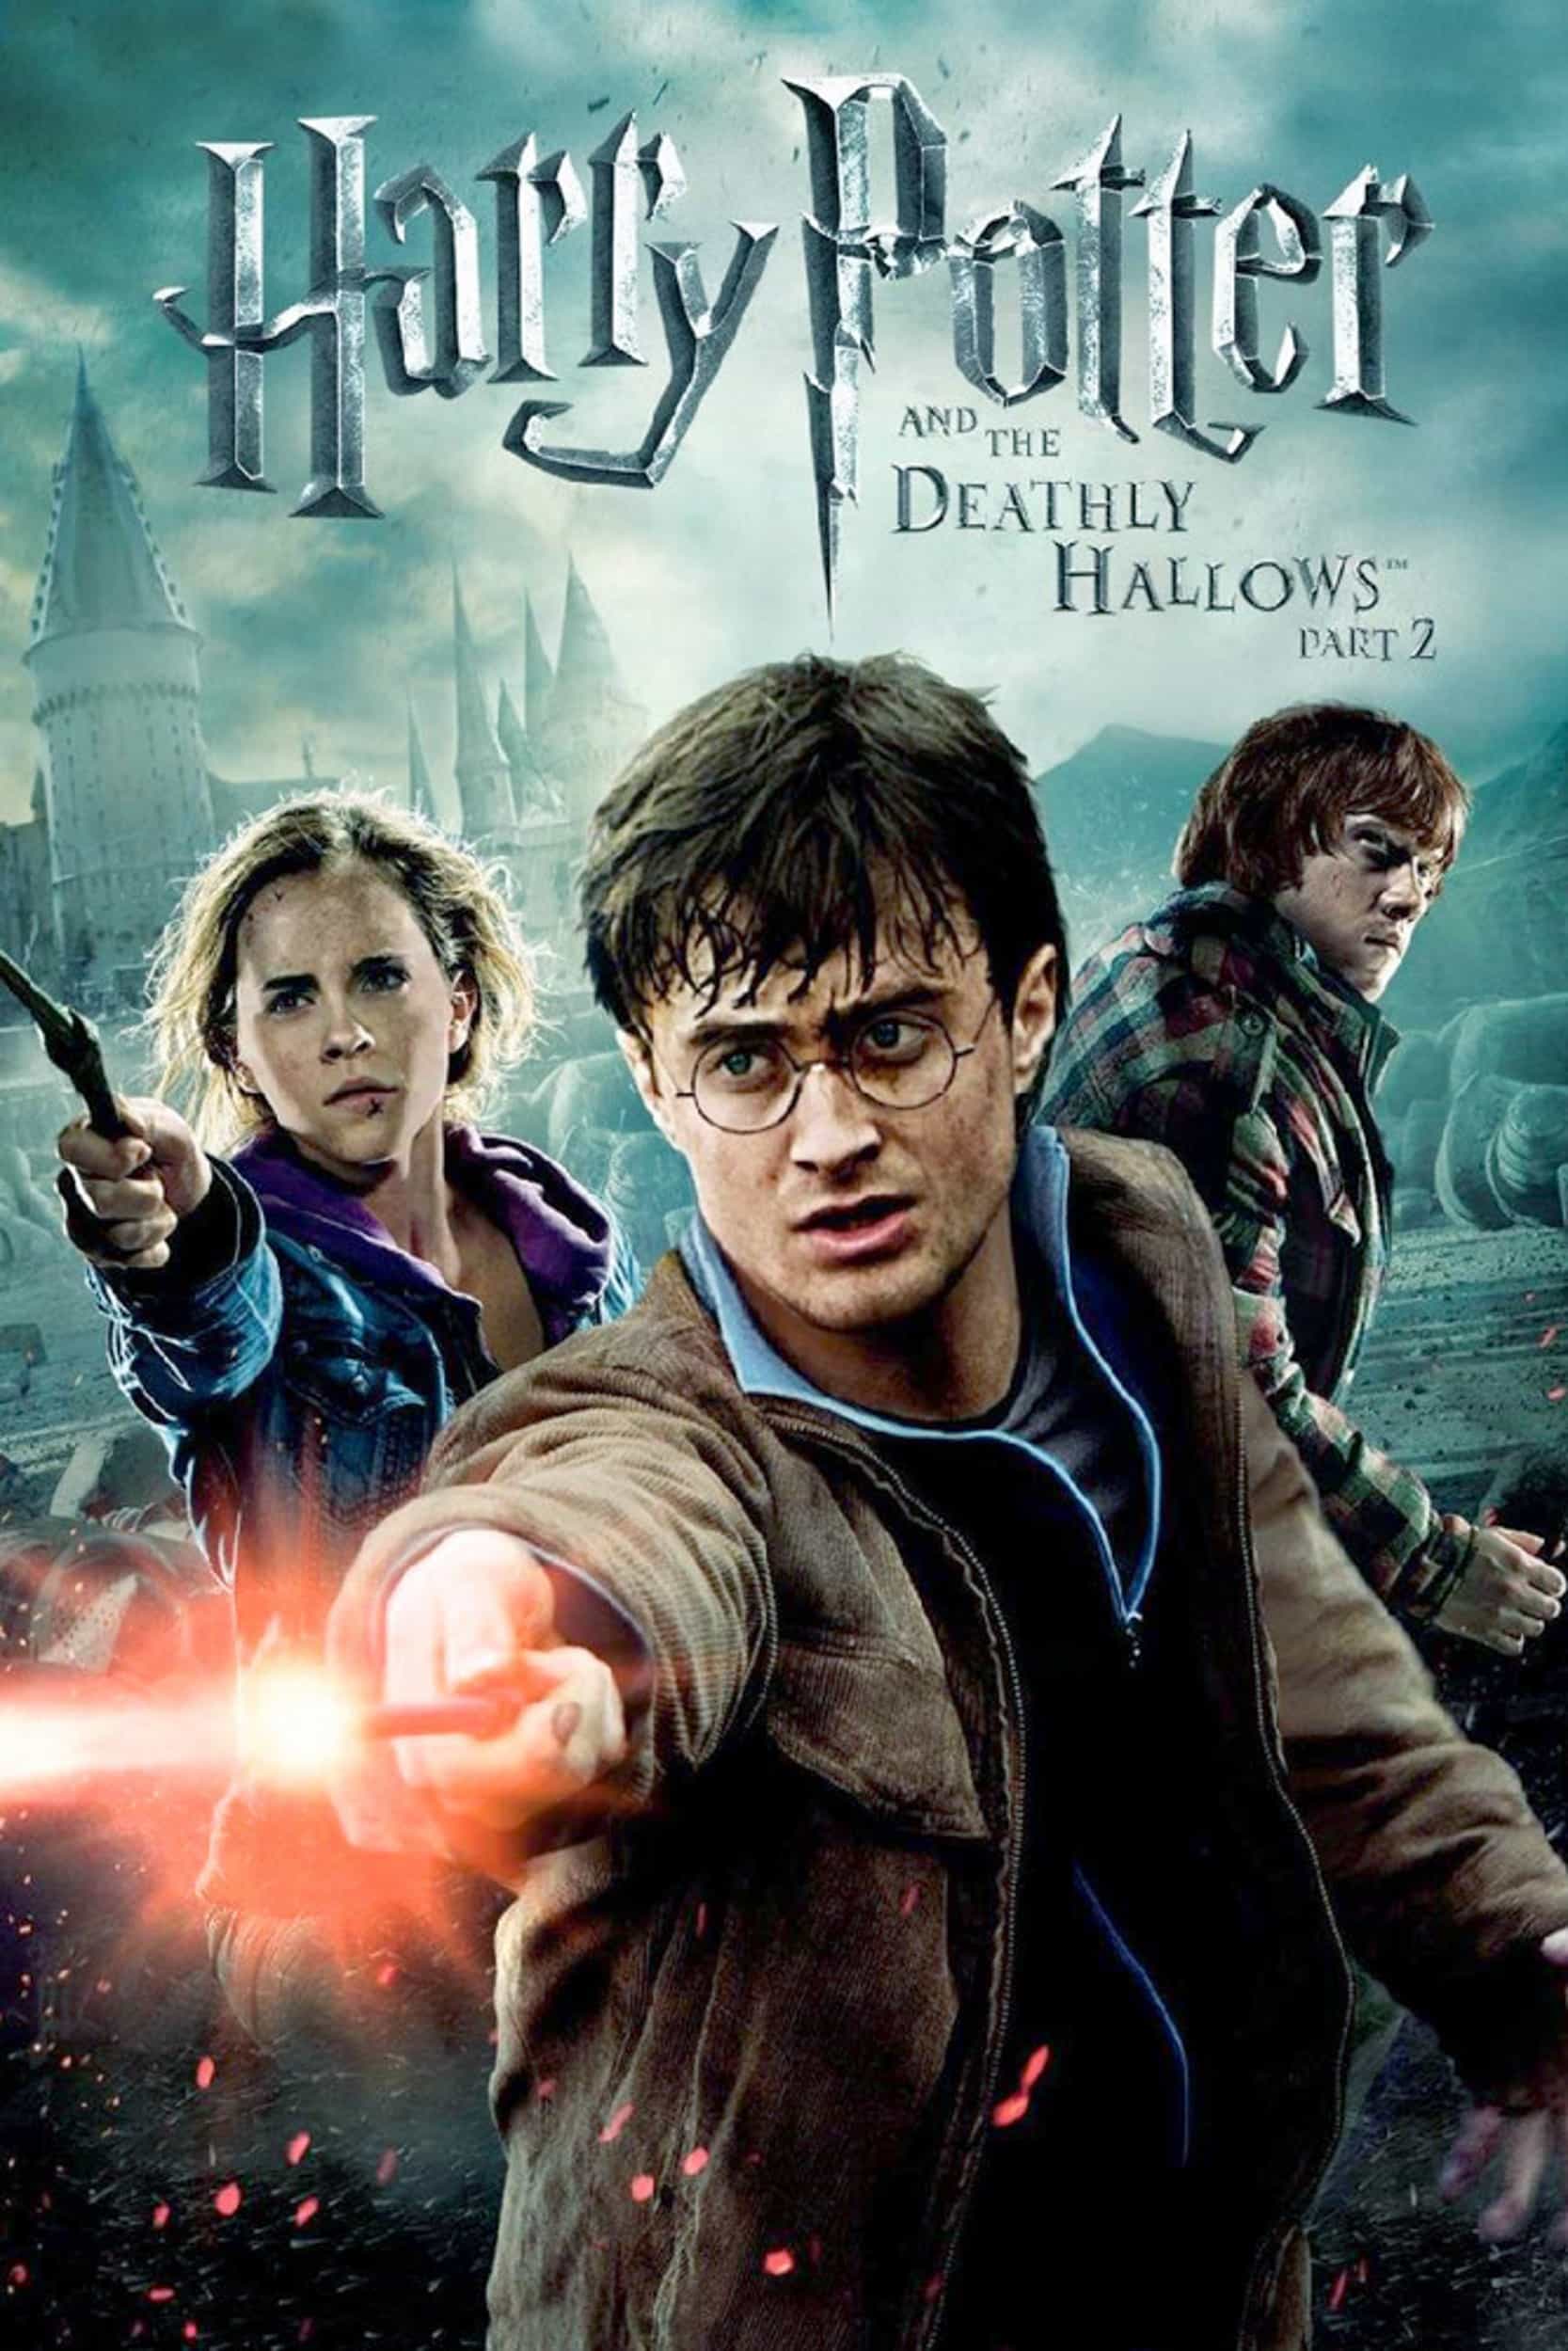 Harry Potter is top film at the world box office for 2011